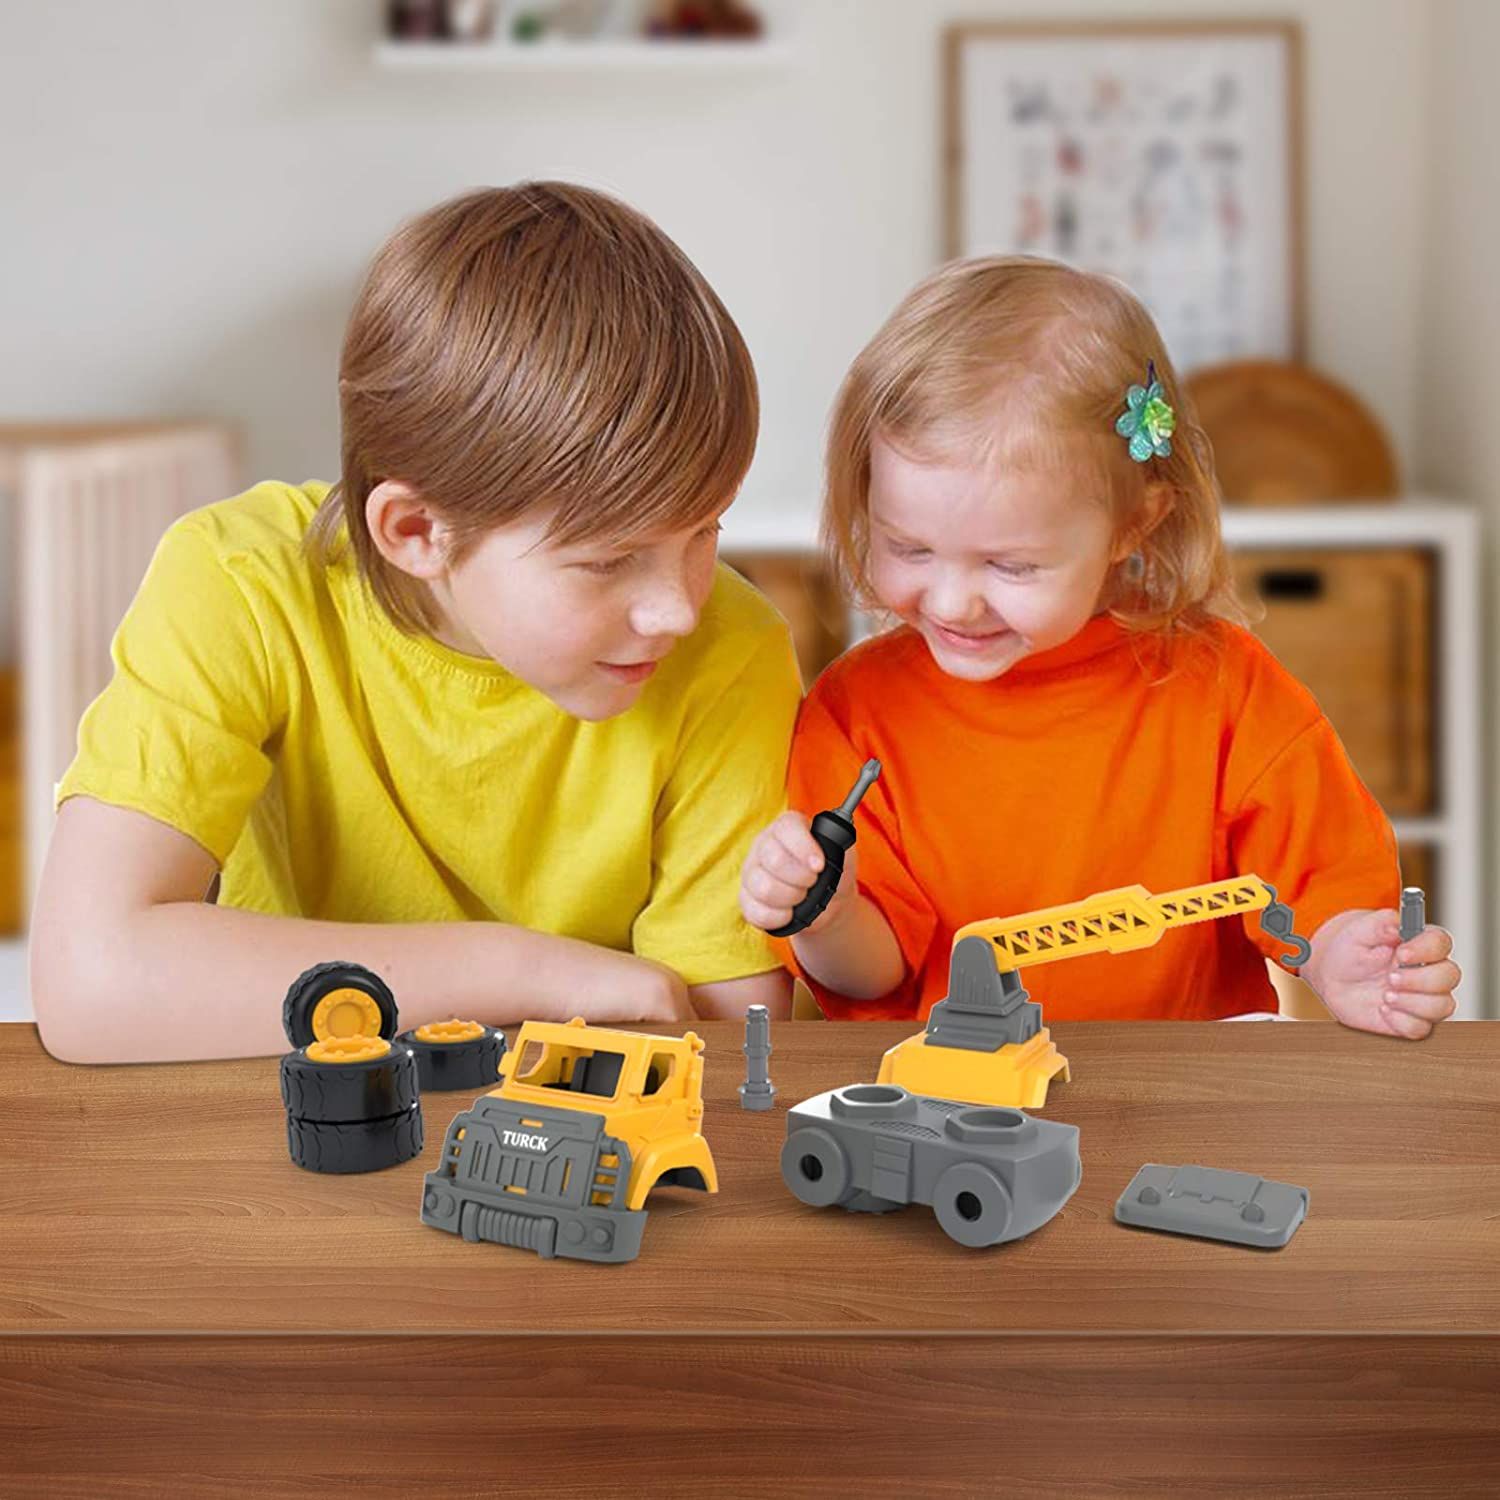 68 Pcs Building Trucks Toy Build Your Own Car Kit with Screws Educational Gift Toys for Boys Girls Age 3 7 in 1 Construction Vehicles Set to Assemble Take Apart Toy 